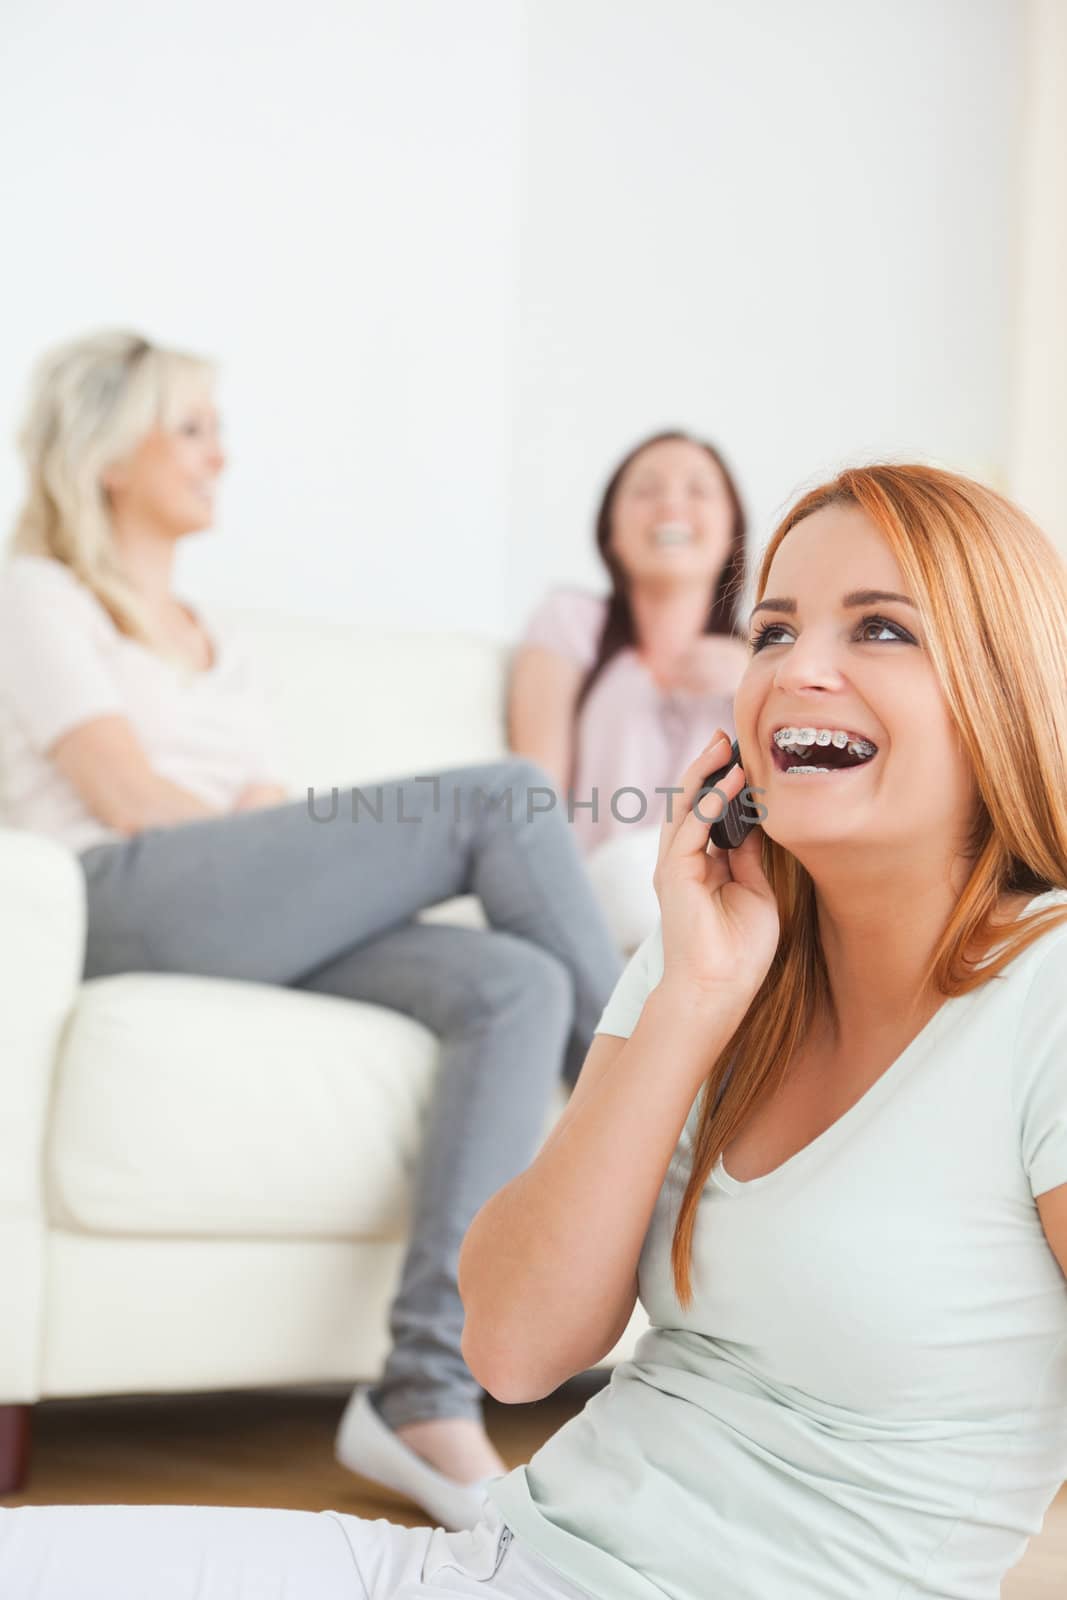 Laughing woman with a cellphone separated from the others in a living room